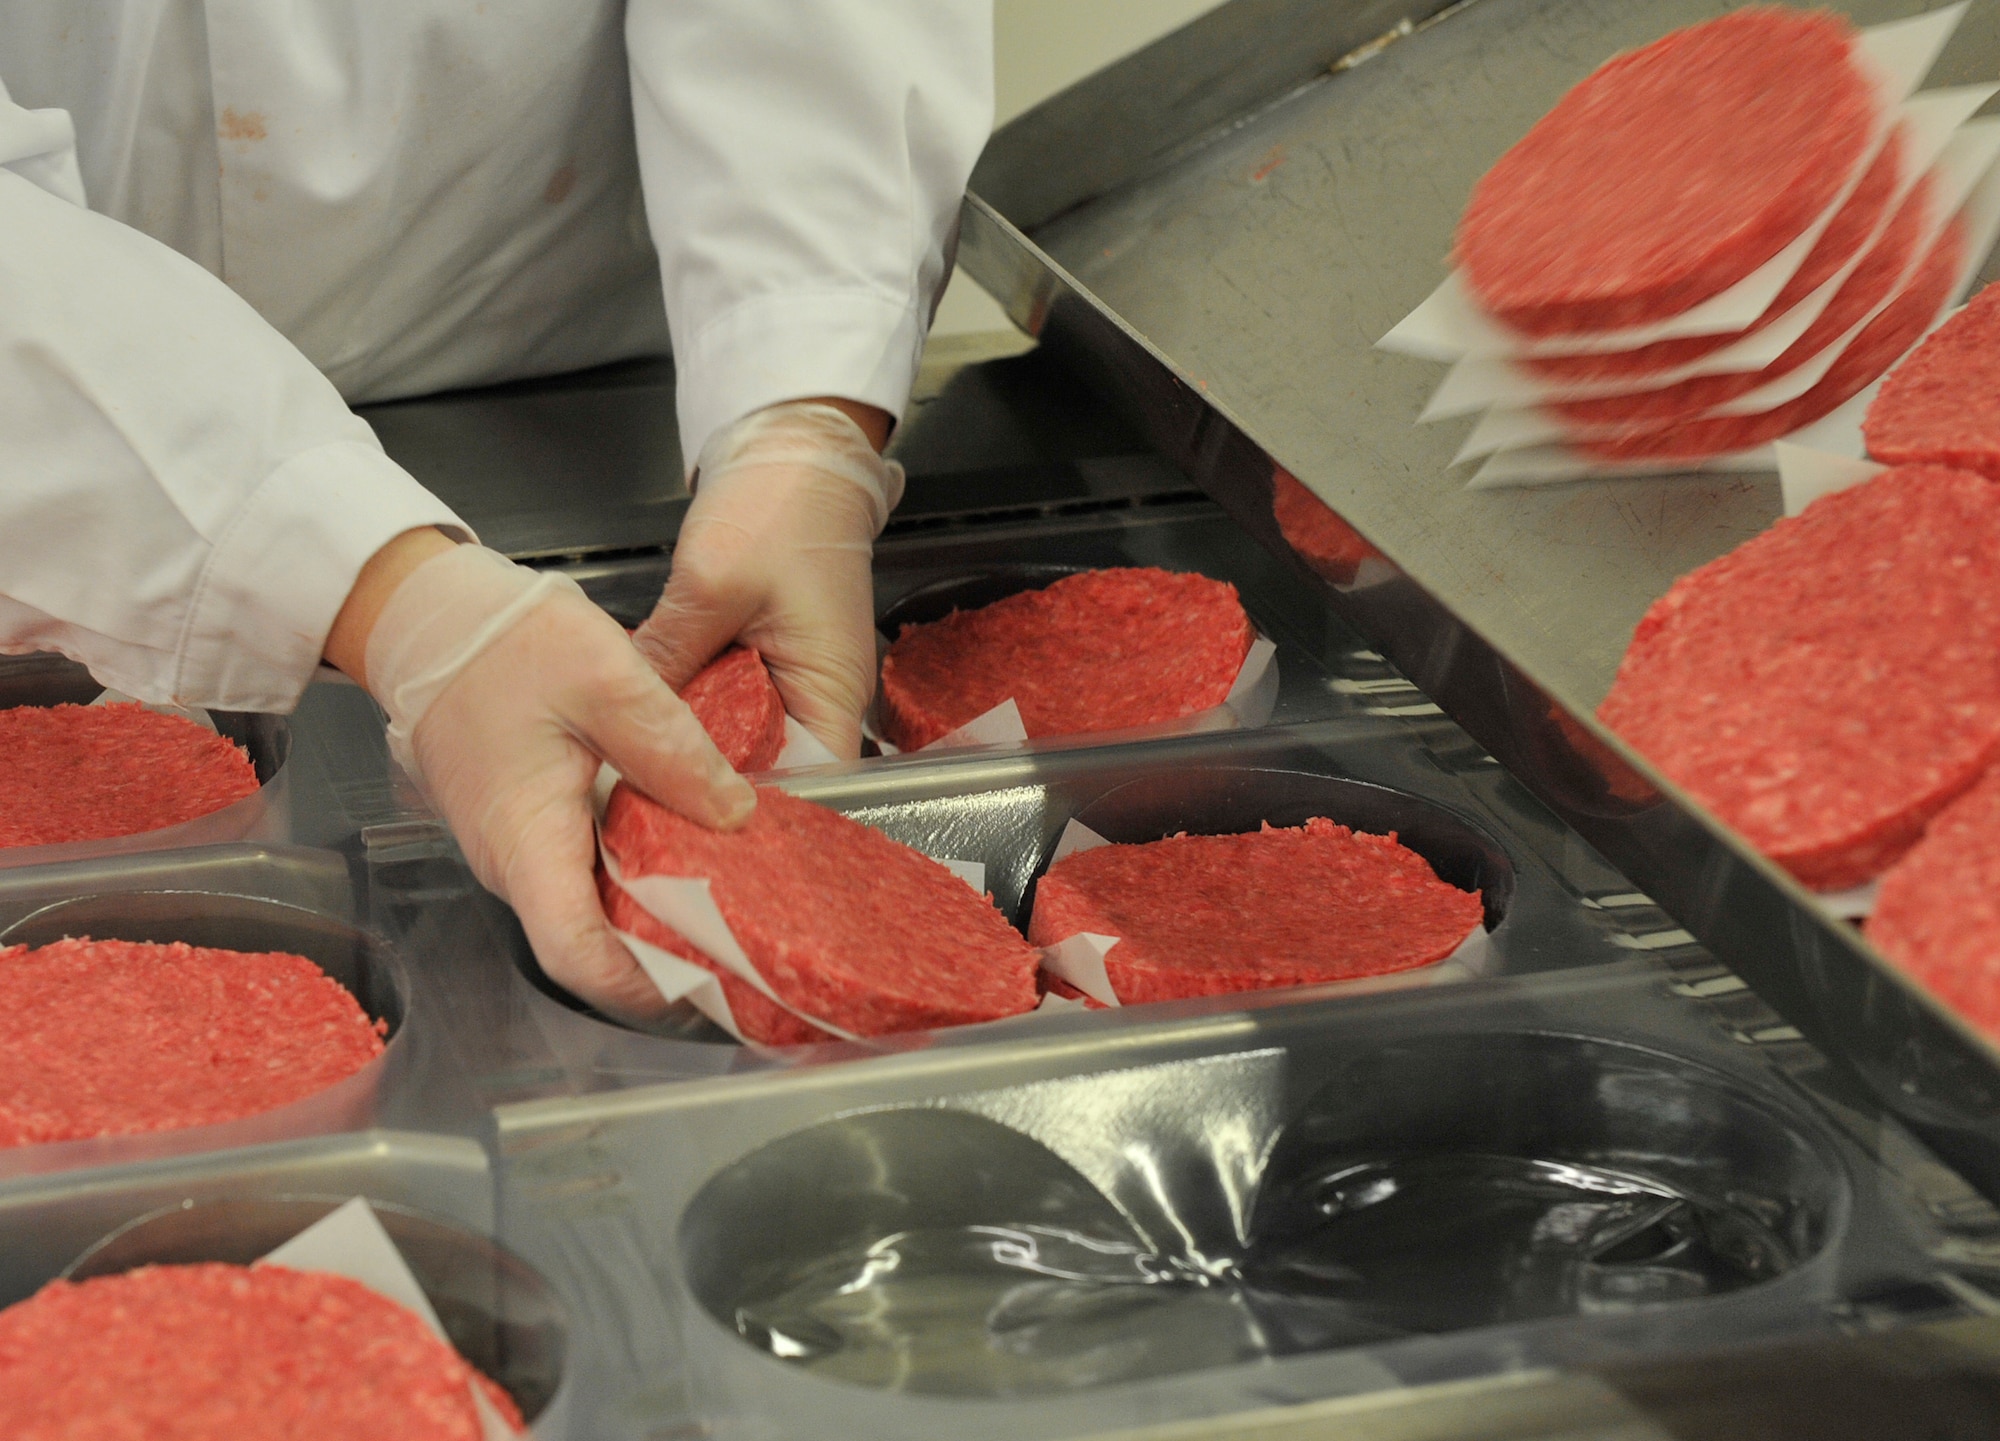 An employee hand packages hamburger patties at the Ramstein Central Meat Processing Plant Jan. 25, 2016, at Ramstein Air Base, Germany. The Ramstein CMPP cuts, packages and ships more than 713,000 pounds of fresh and frozen beef and pork to 35 commissaries and 18 Army and Air Force Exchange Service locations overseas. (U.S. Air Force photo/Airman 1st Class Larissa Greatwood)